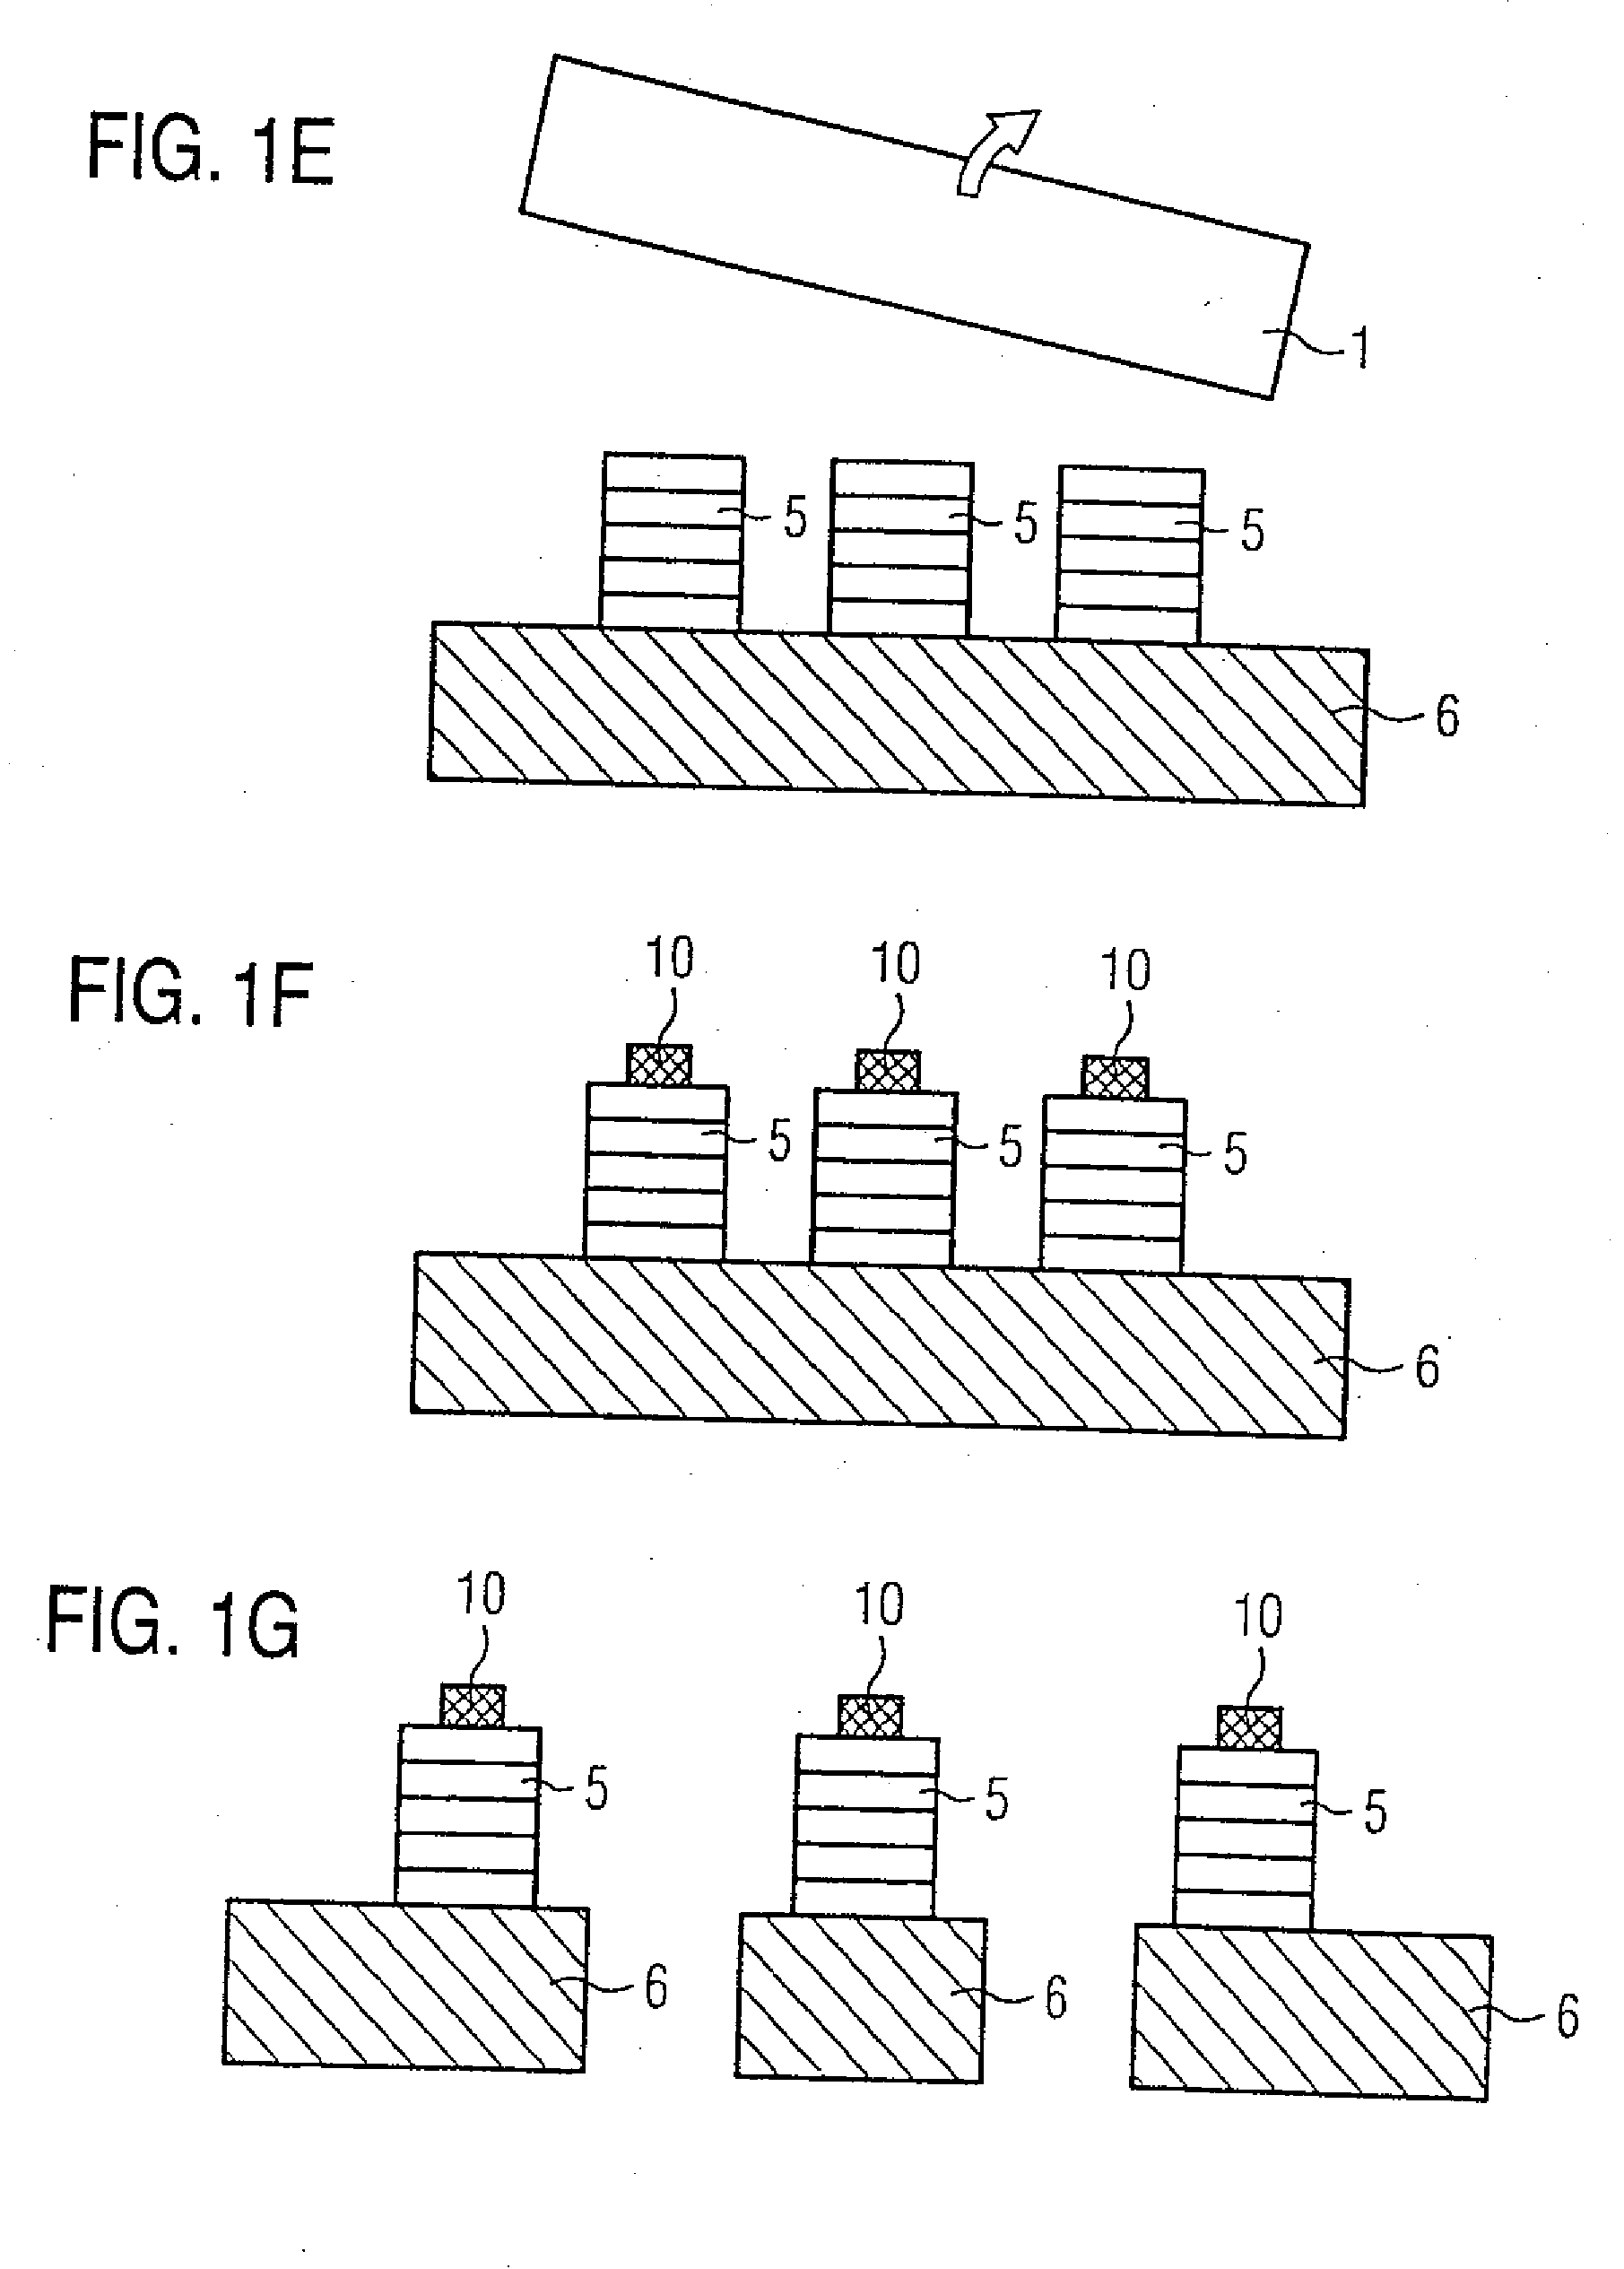 Method for Fabricating a Semiconductor Component Based on GaN